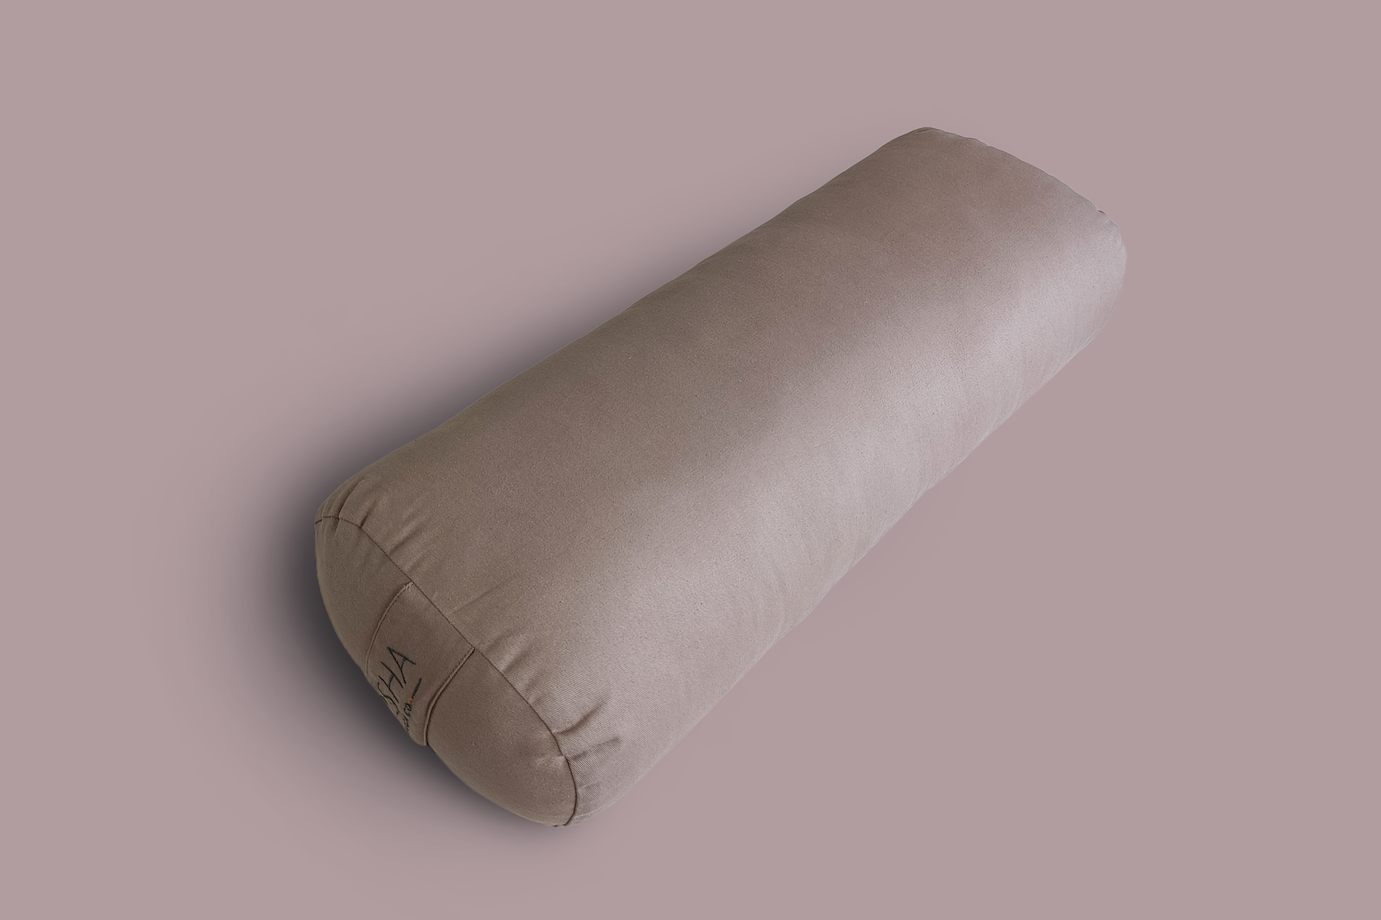 Yoga bolster with cotton cover with soft cushioning for yin yoga restorative yoga relaxation mindfulness meditation in beige cream brown natural colour